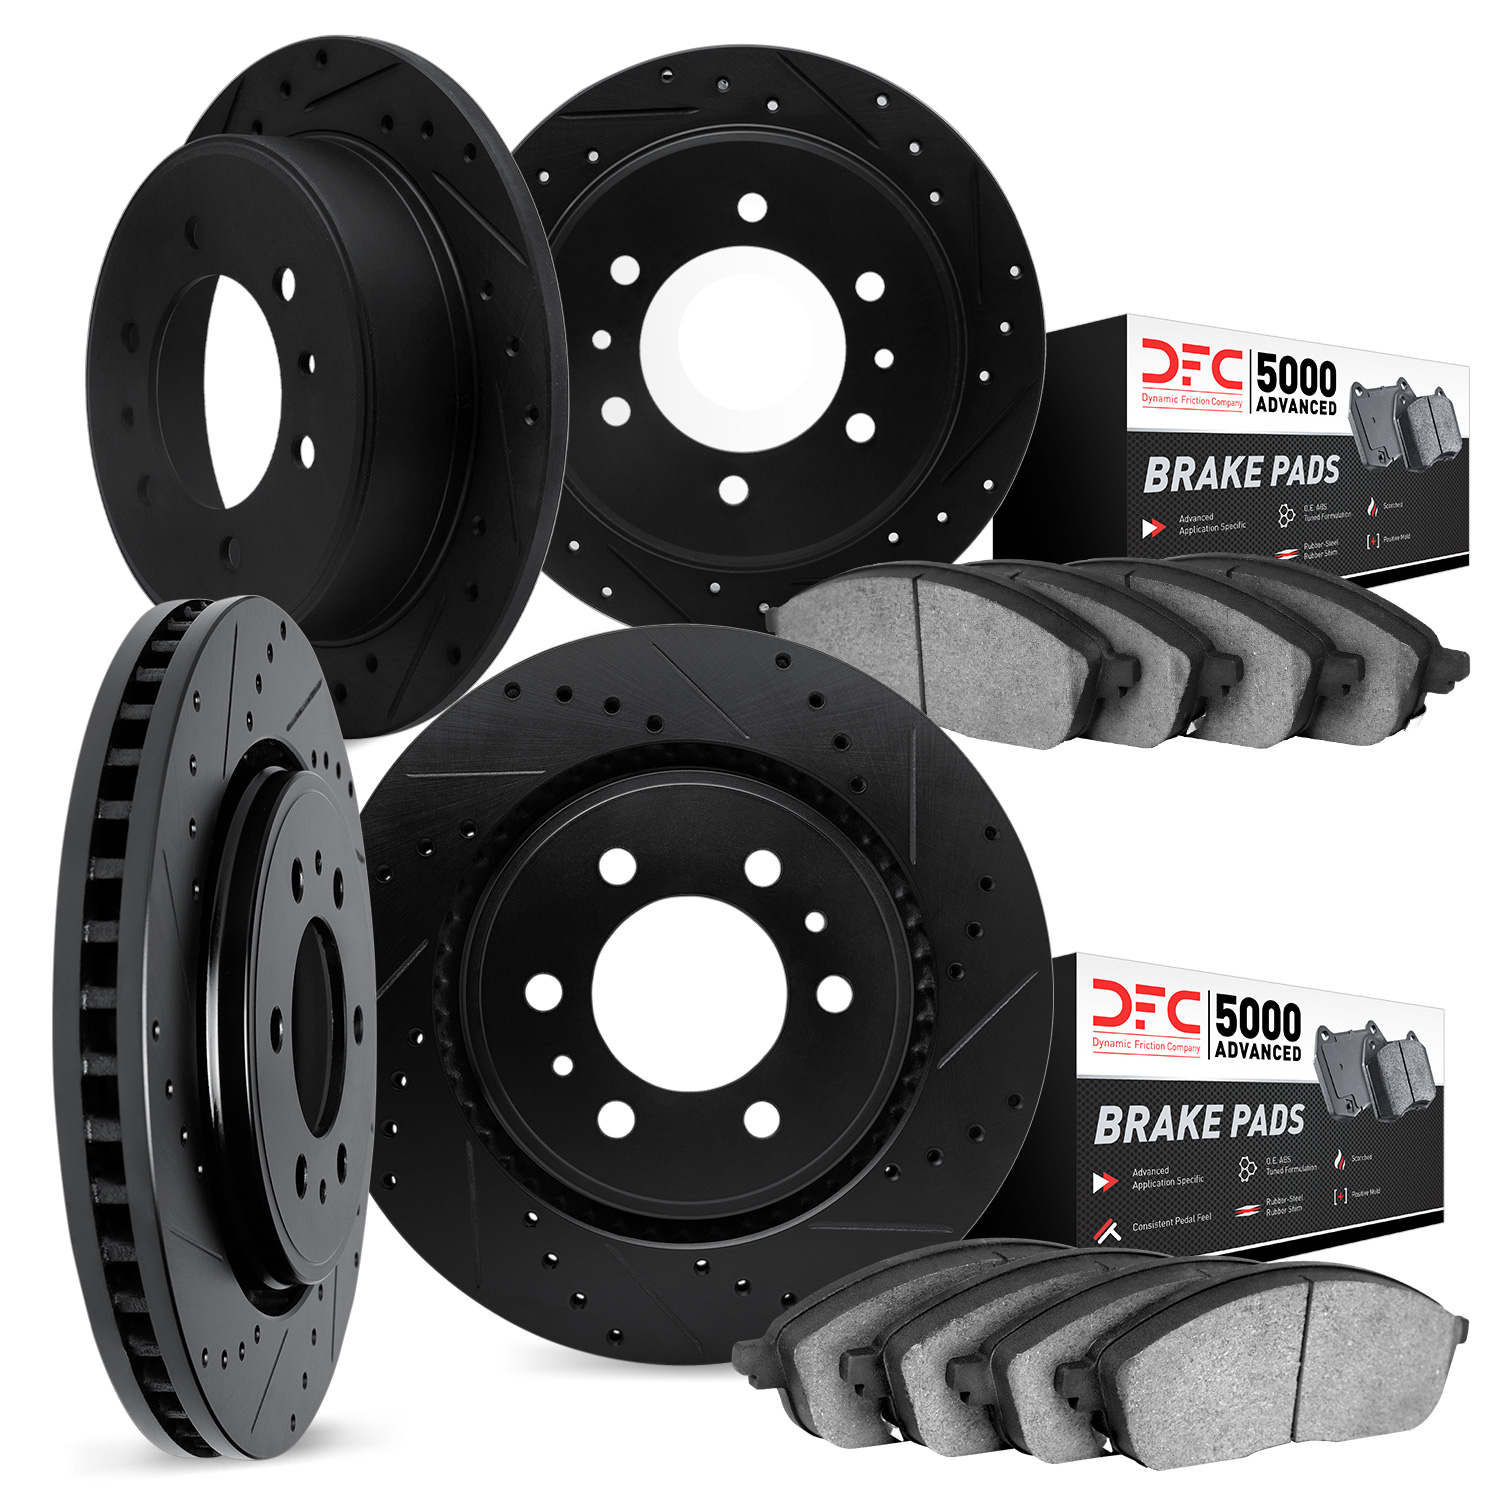 7504-52007 Drilled/Slotted Brake Rotors w/5000 Advanced Brake Pads Kit [Silver], 2006-2009 GM, Position: Front and Rear